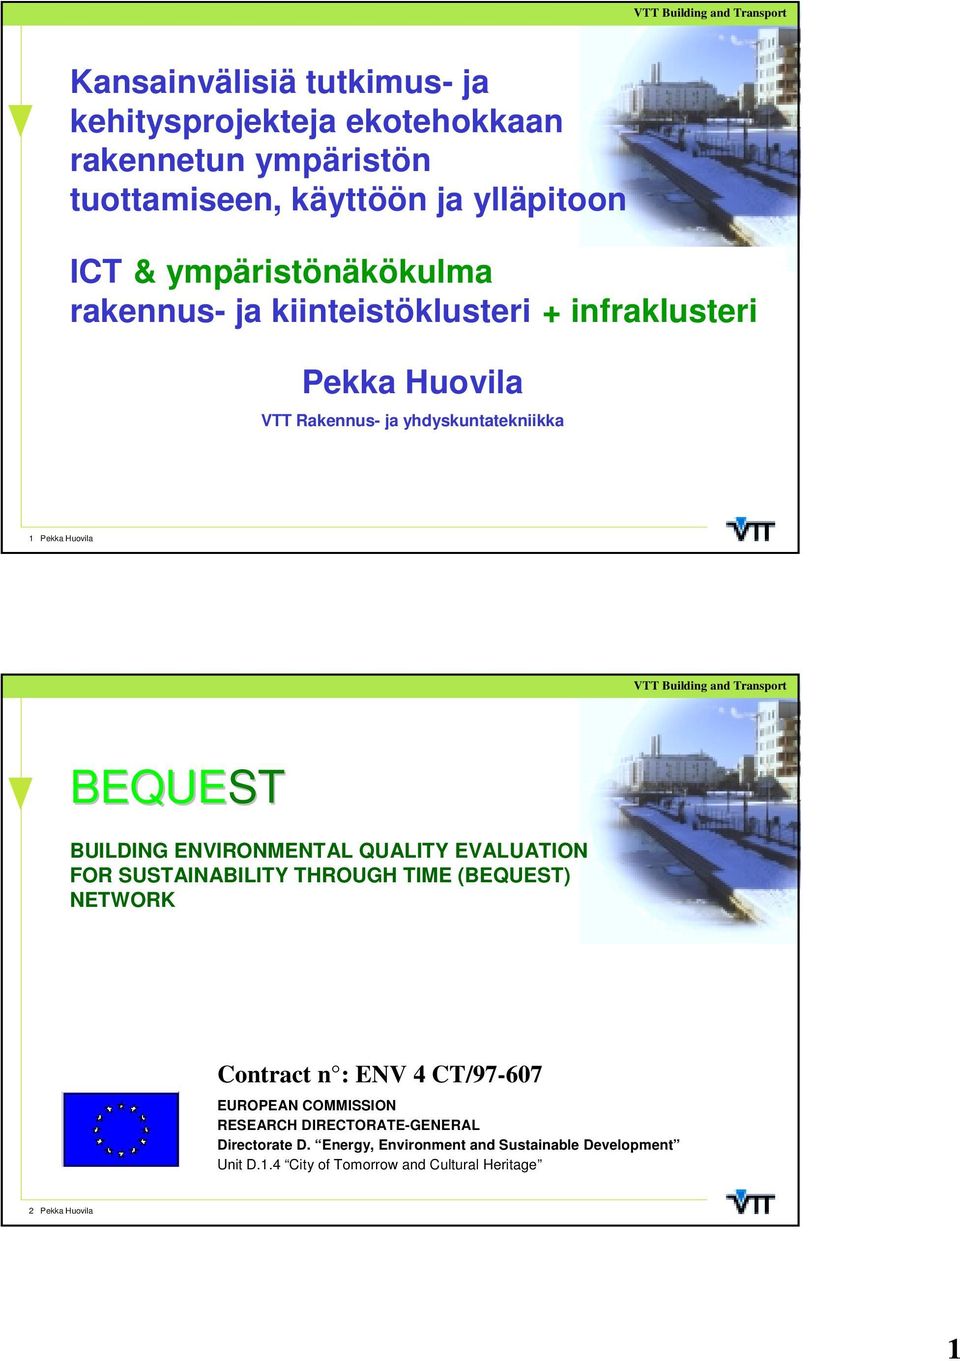 BUILDING ENVIRONMENTAL QUALITY EVALUATION FOR SUSTAINABILITY THROUGH TIME (BEQUEST) NETWORK Contract n : ENV 4 CT/97-607 EUROPEAN COMMISSION